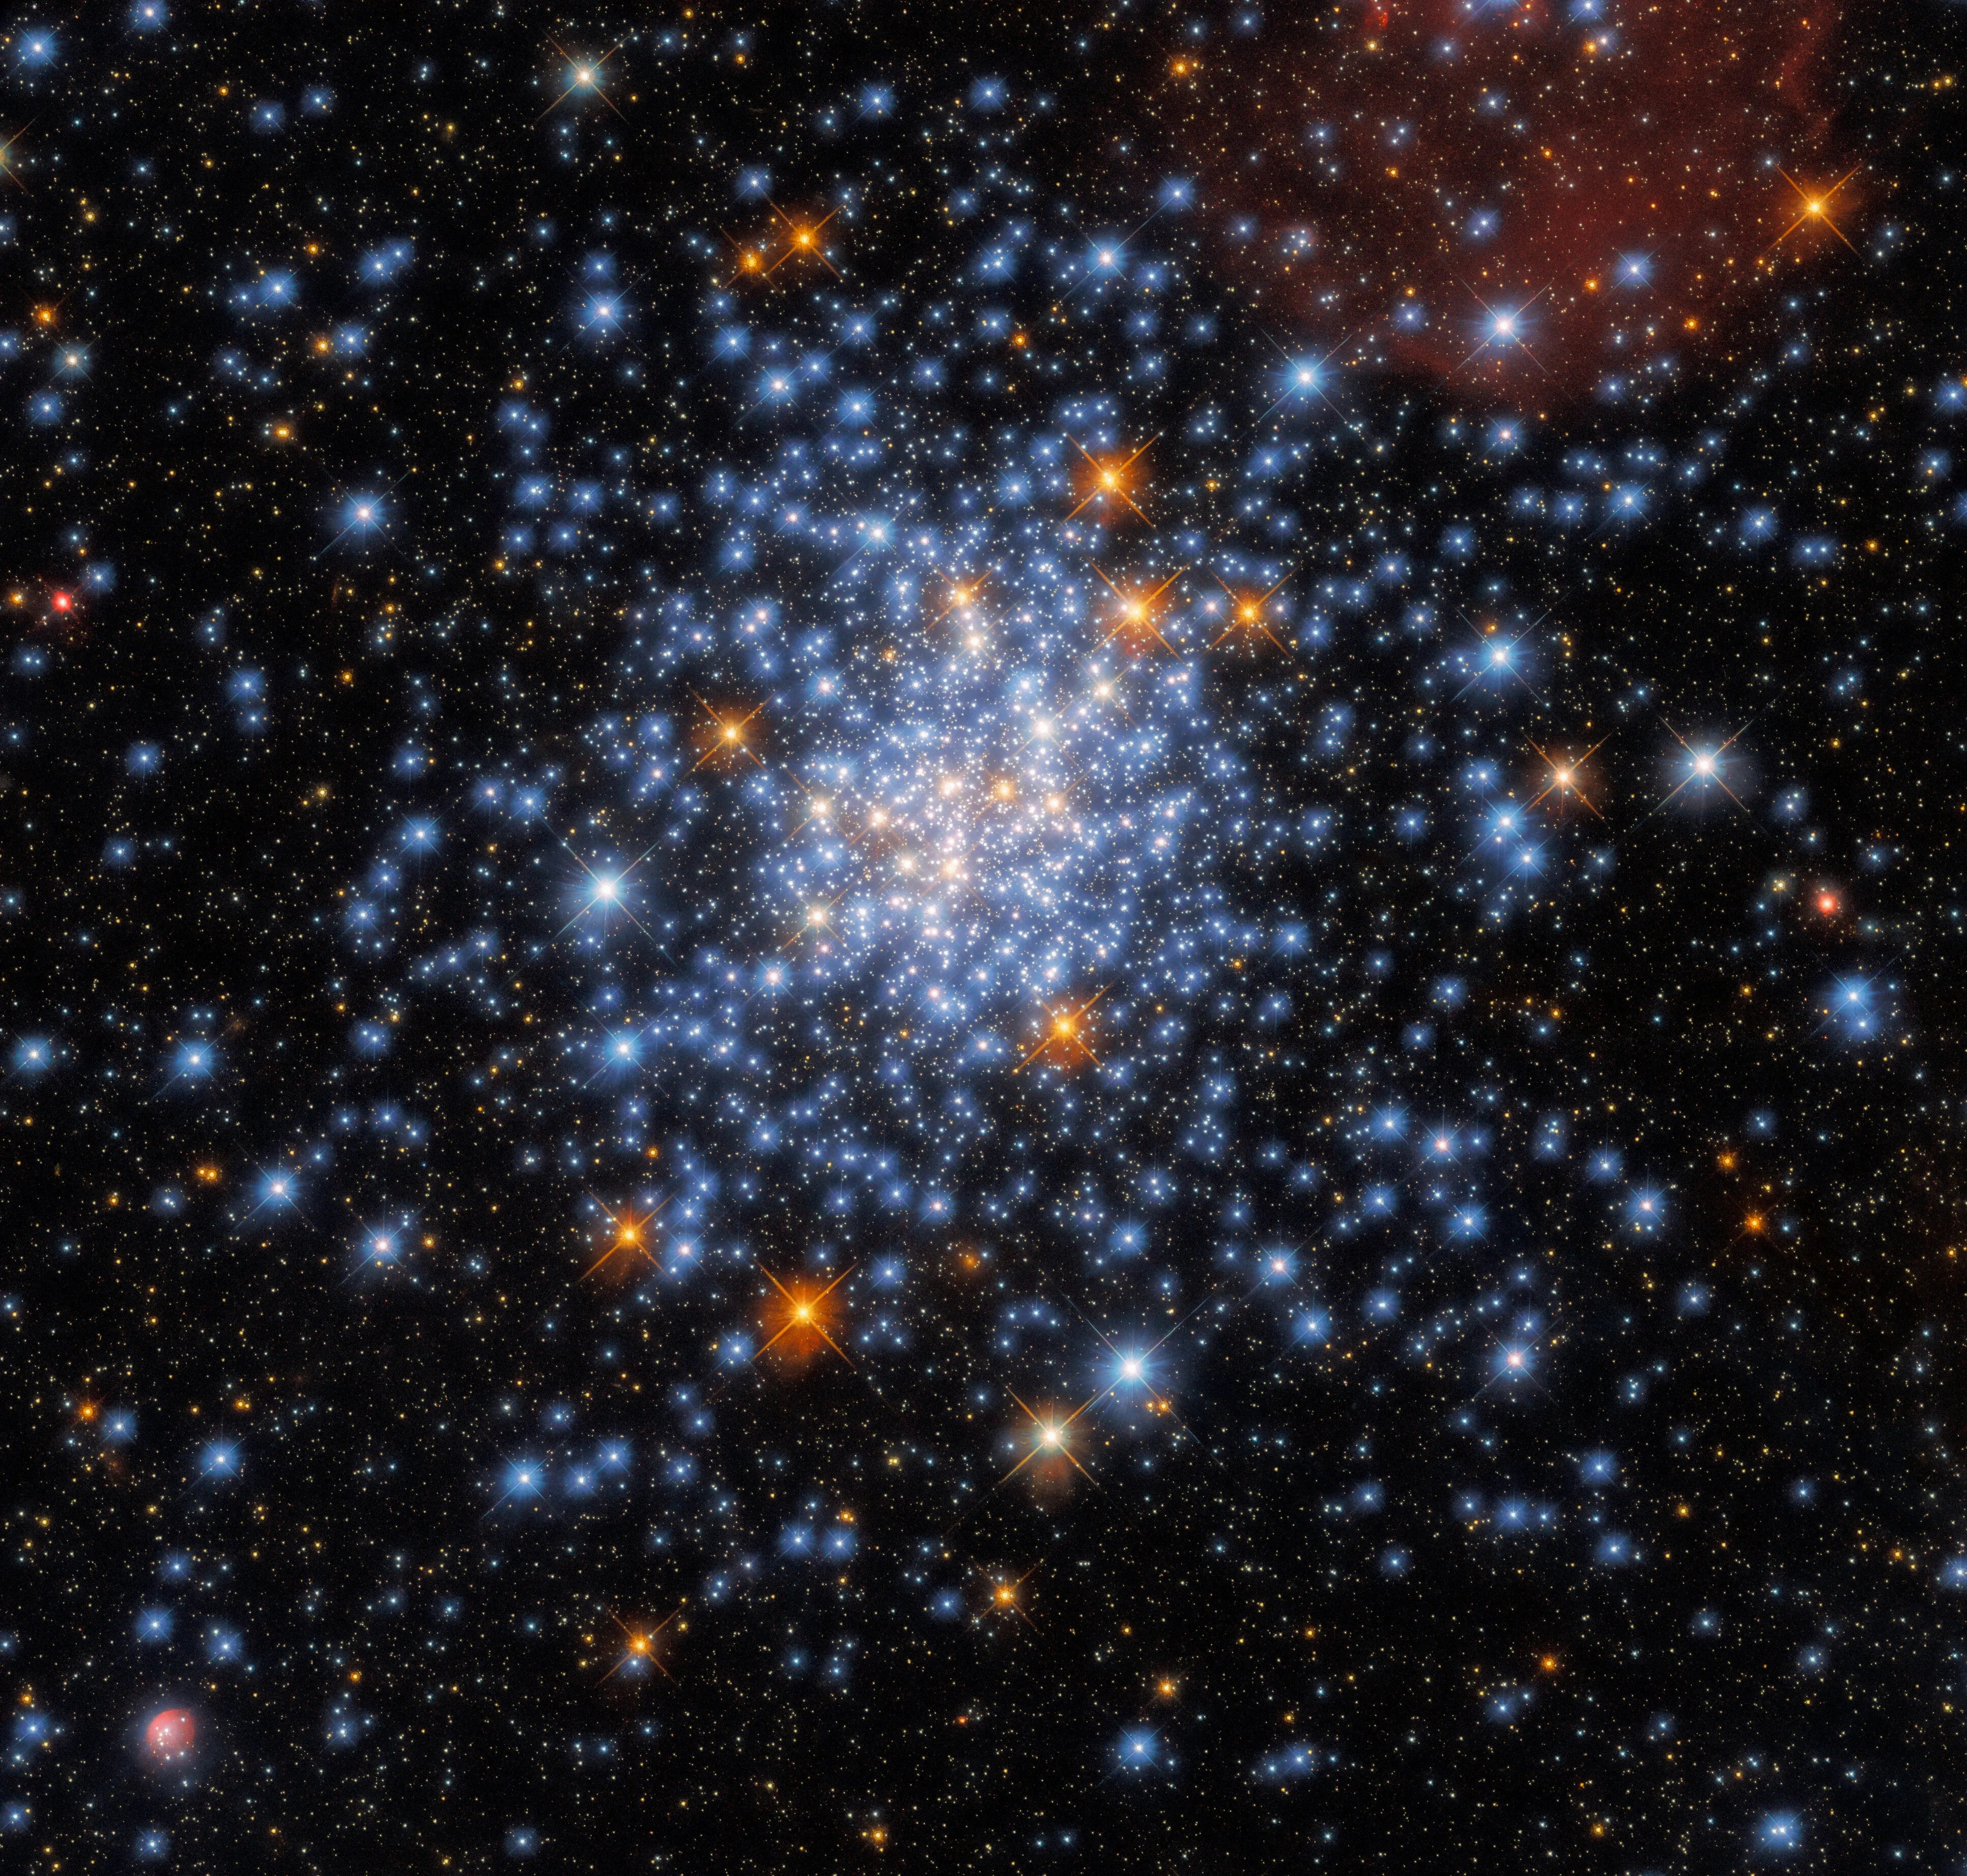 This image taken with the nasa/esa hubble space telescope depicts the open star cluster ngc 330, which lies around 180,000 light-years away inside the small magellanic cloud.